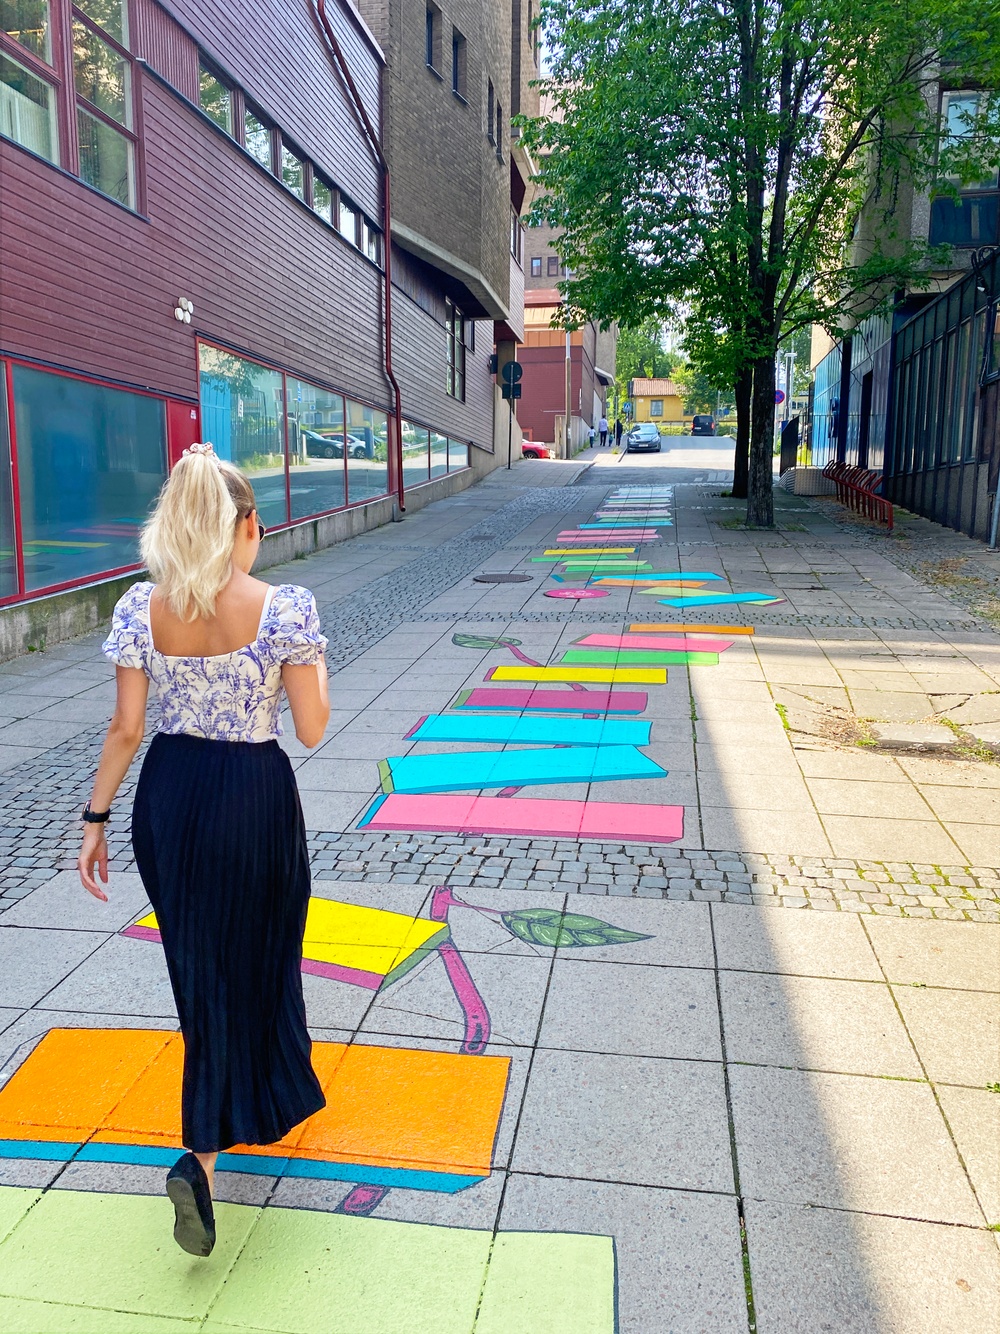 Woman walking on colorful ground